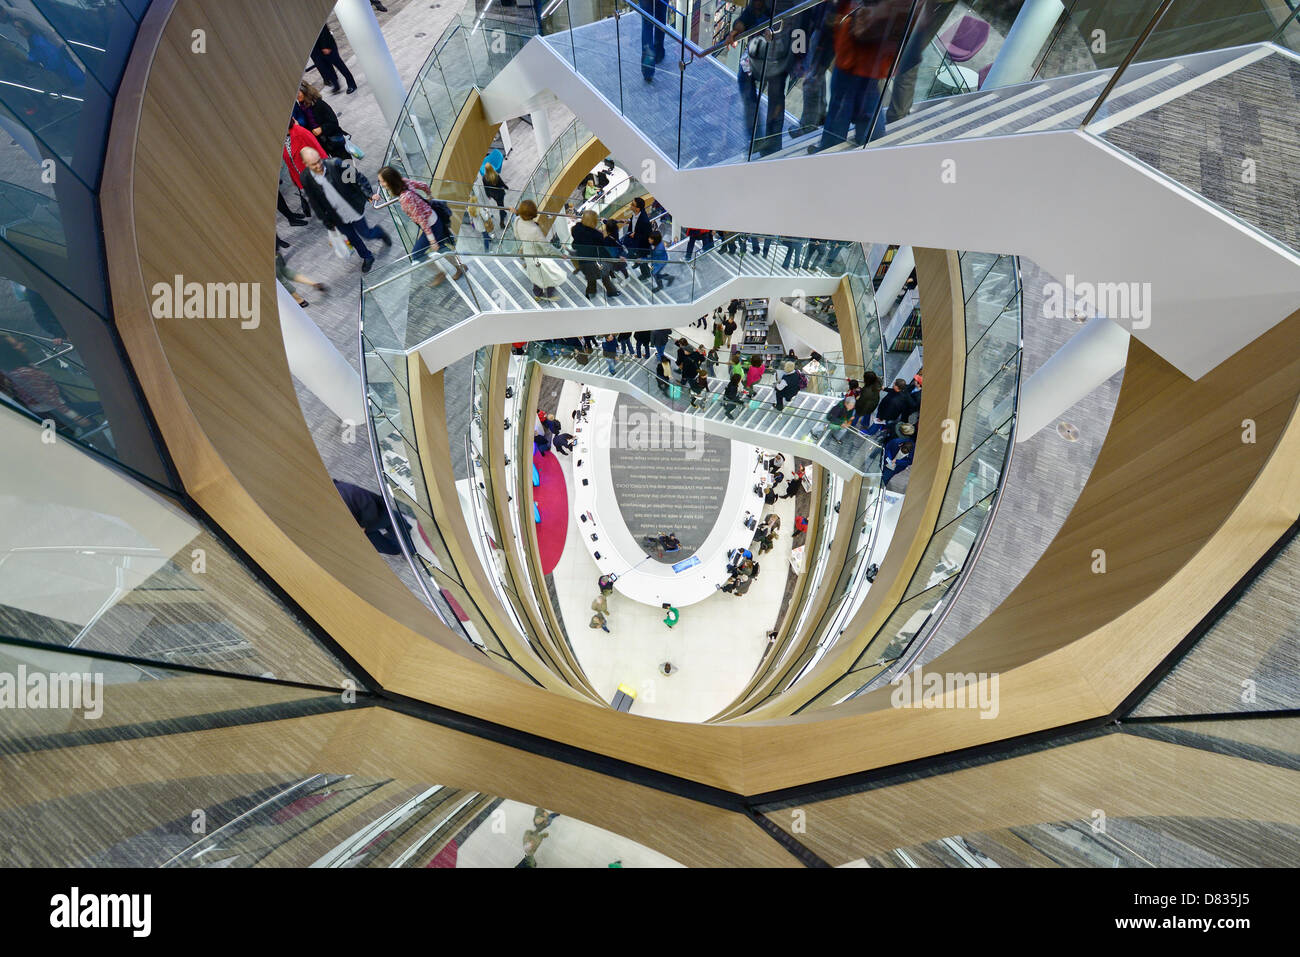 Liverpool, UK. 17th May 2013. Visitors view the central atrium of the Liverpool Central Library on it's official re-opening after a £50m refurbishment. Credit:  Andrew Paterson / Alamy Live News Stock Photo